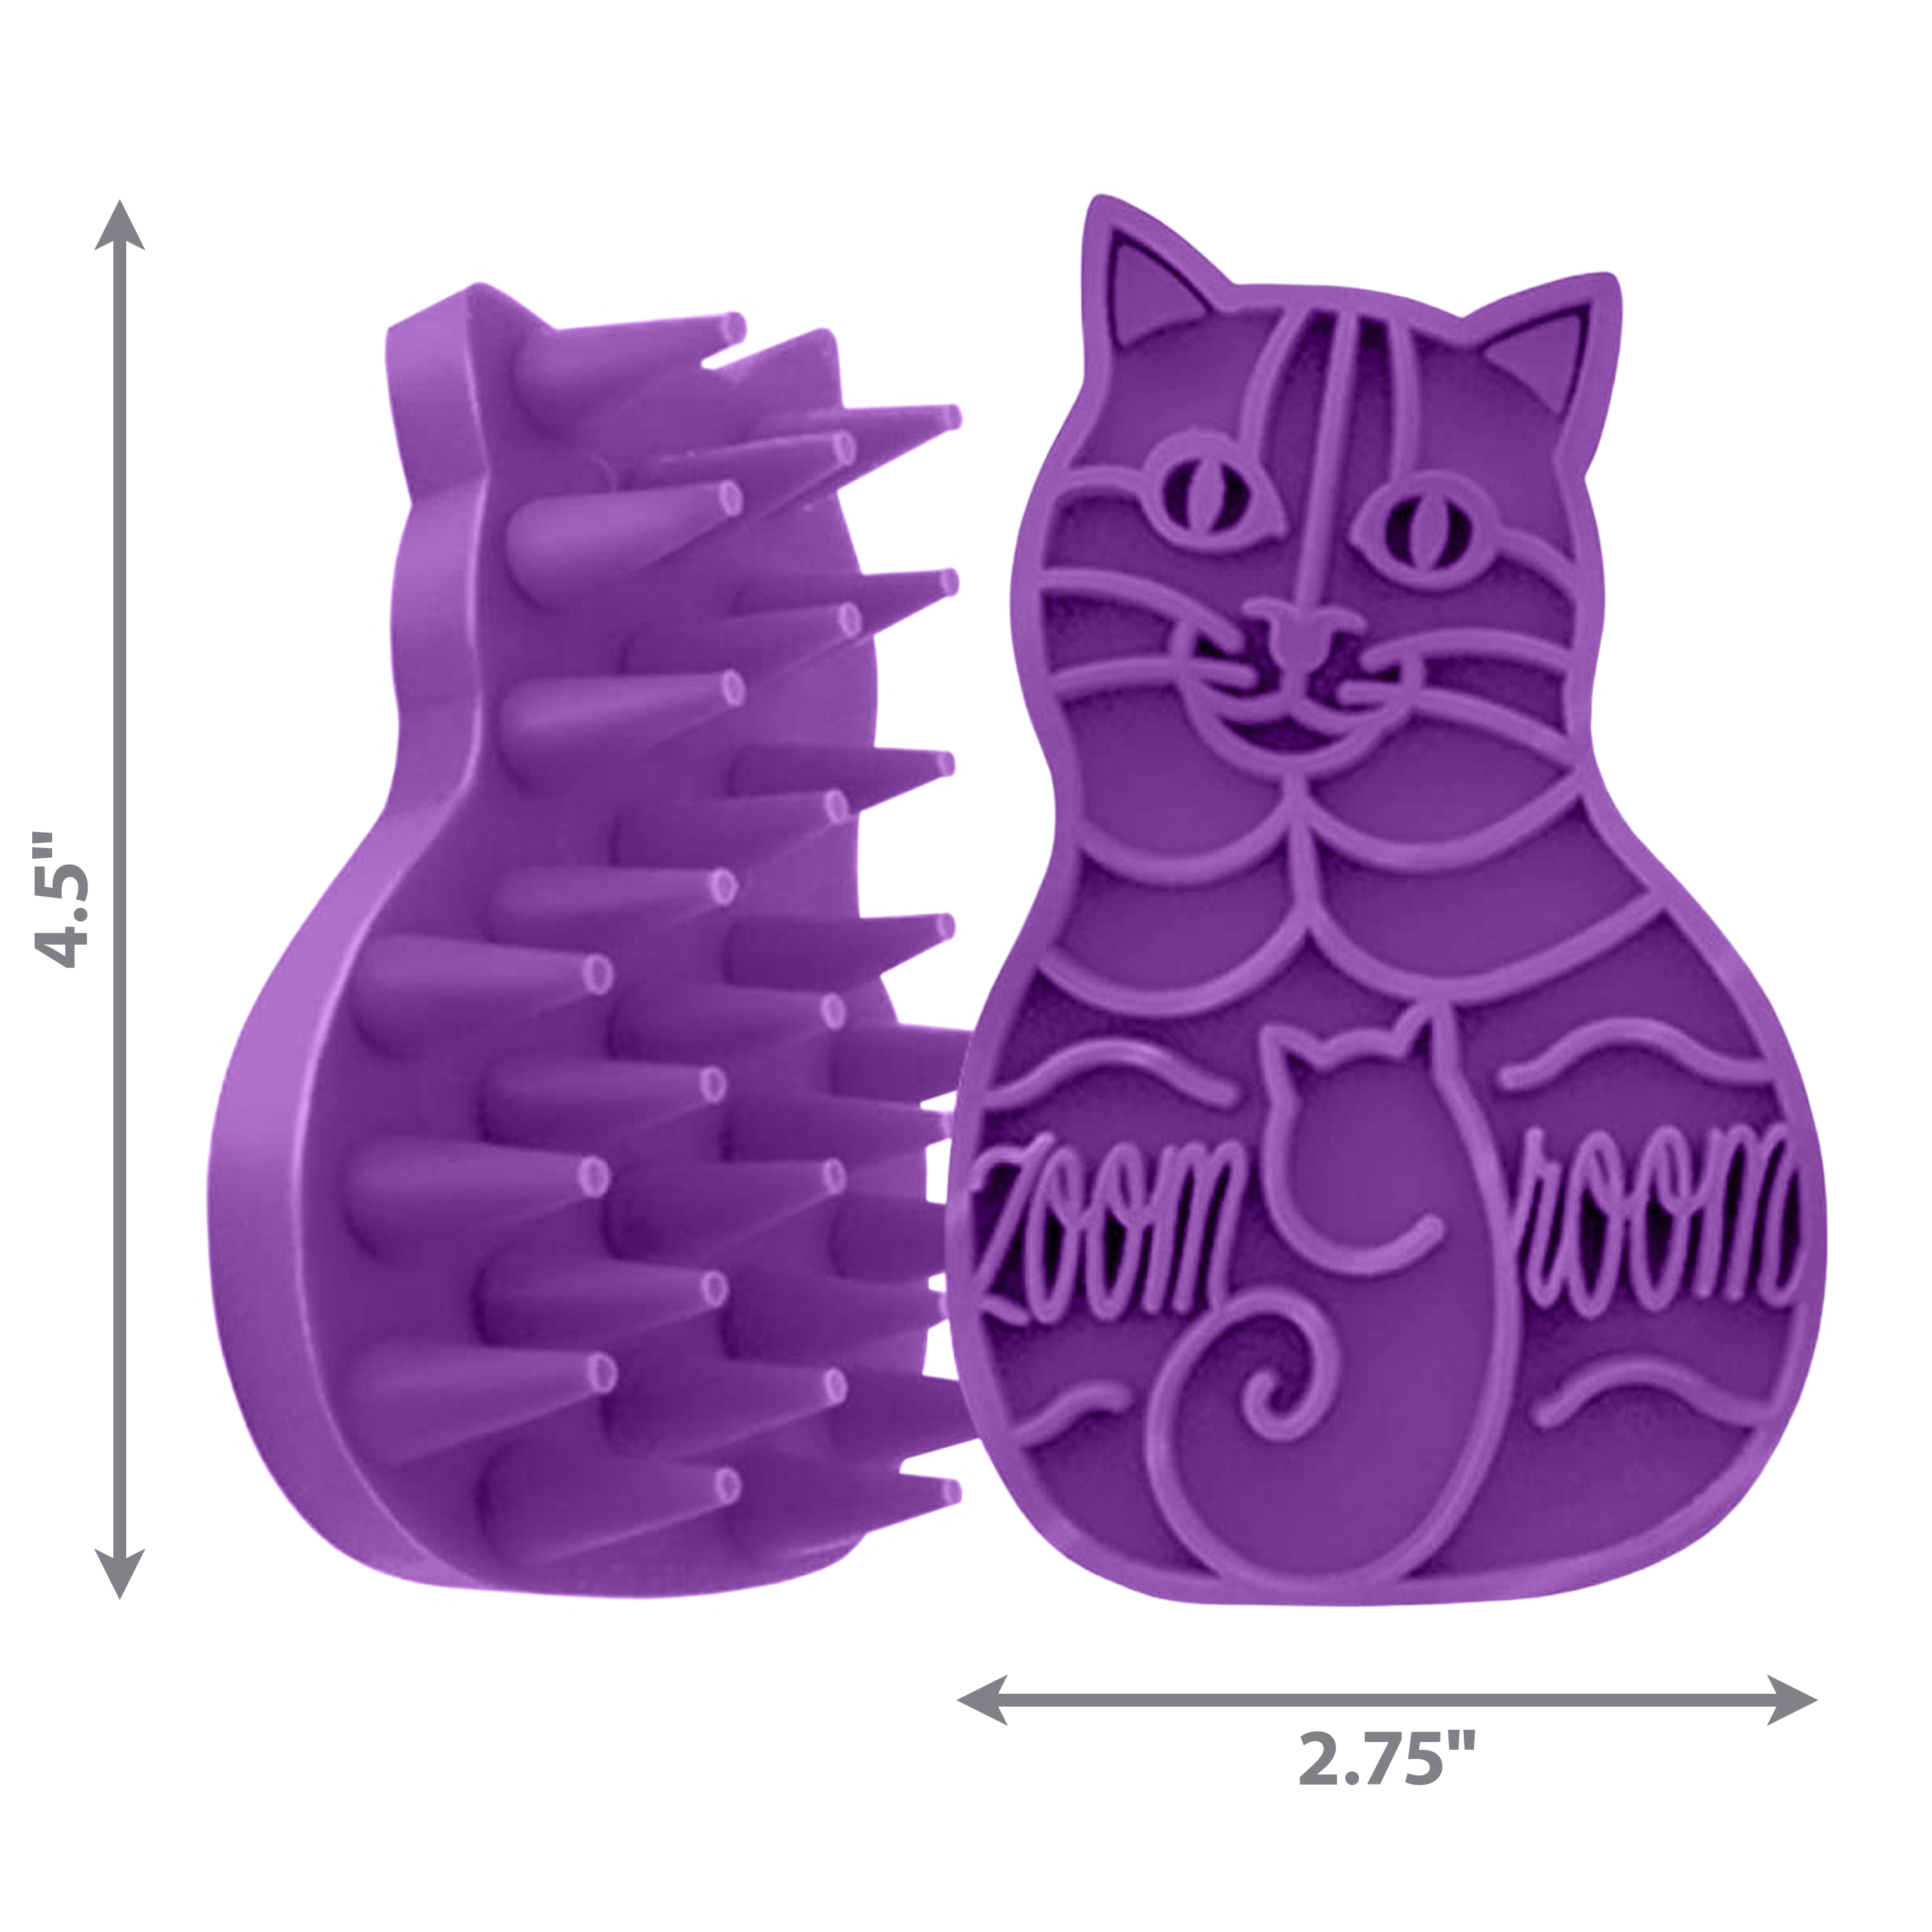 Cat ZoomGroom dimoffpack product image